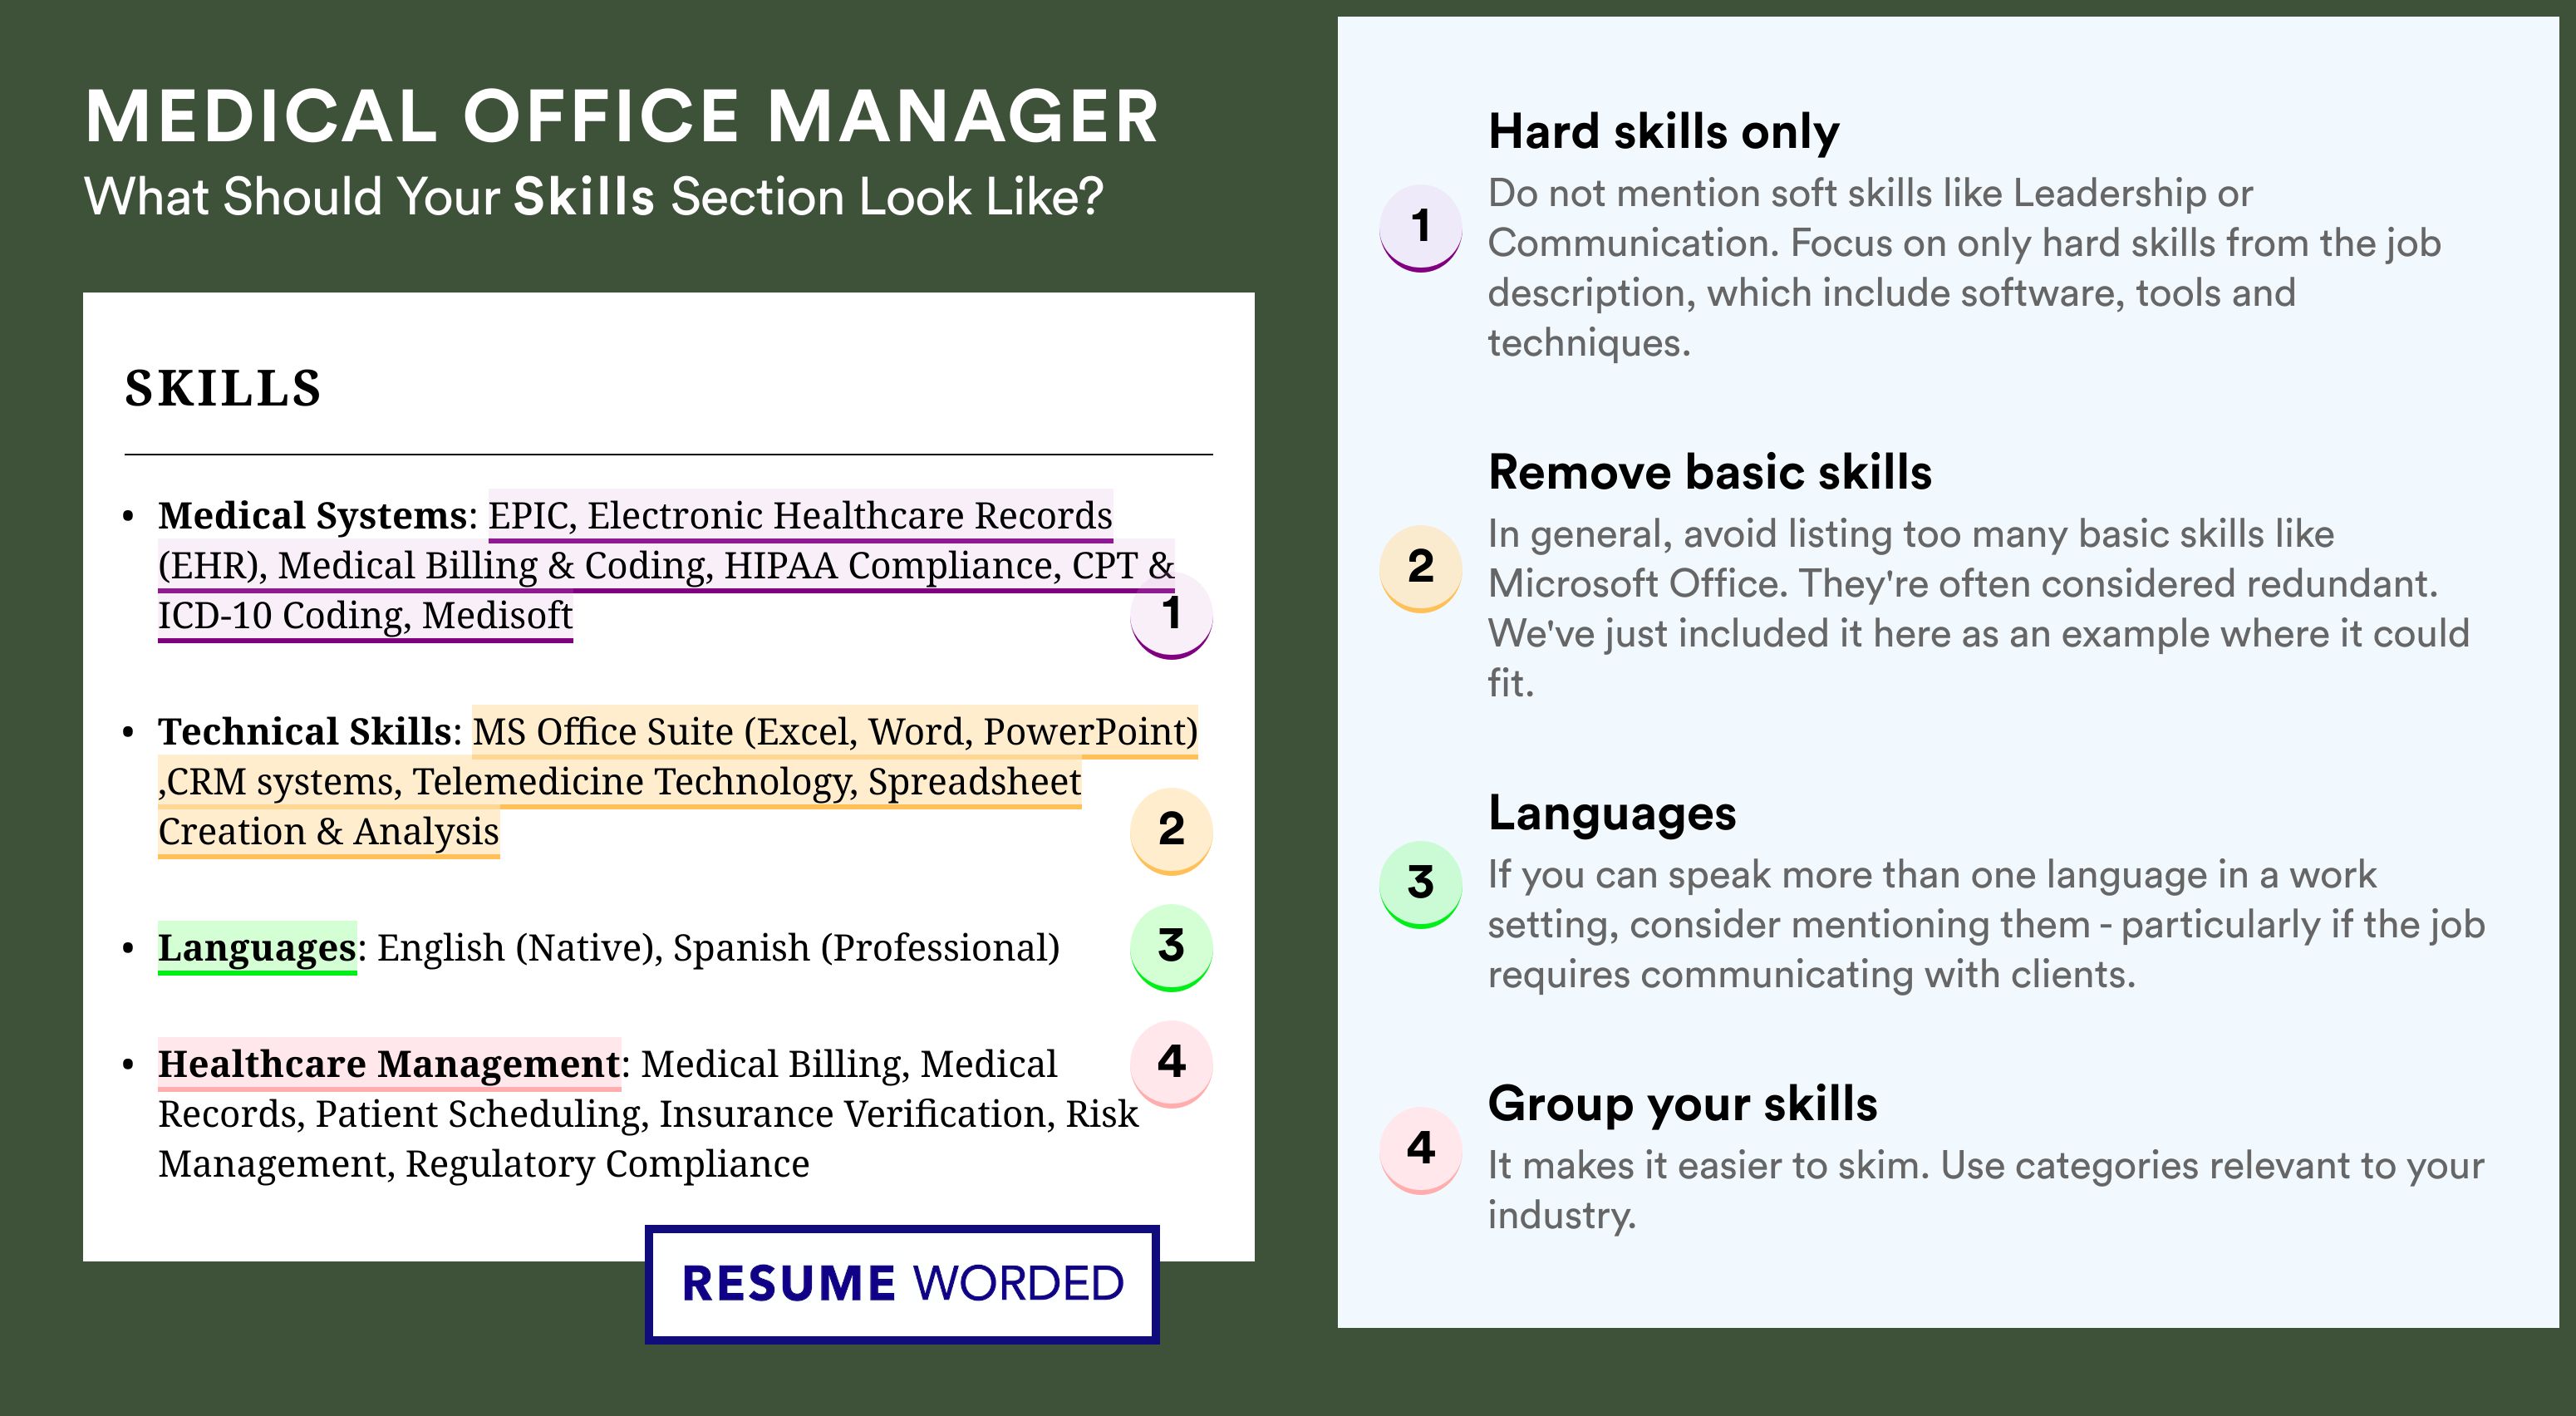 How To Write Your Skills Section - Medical Office Manager Roles